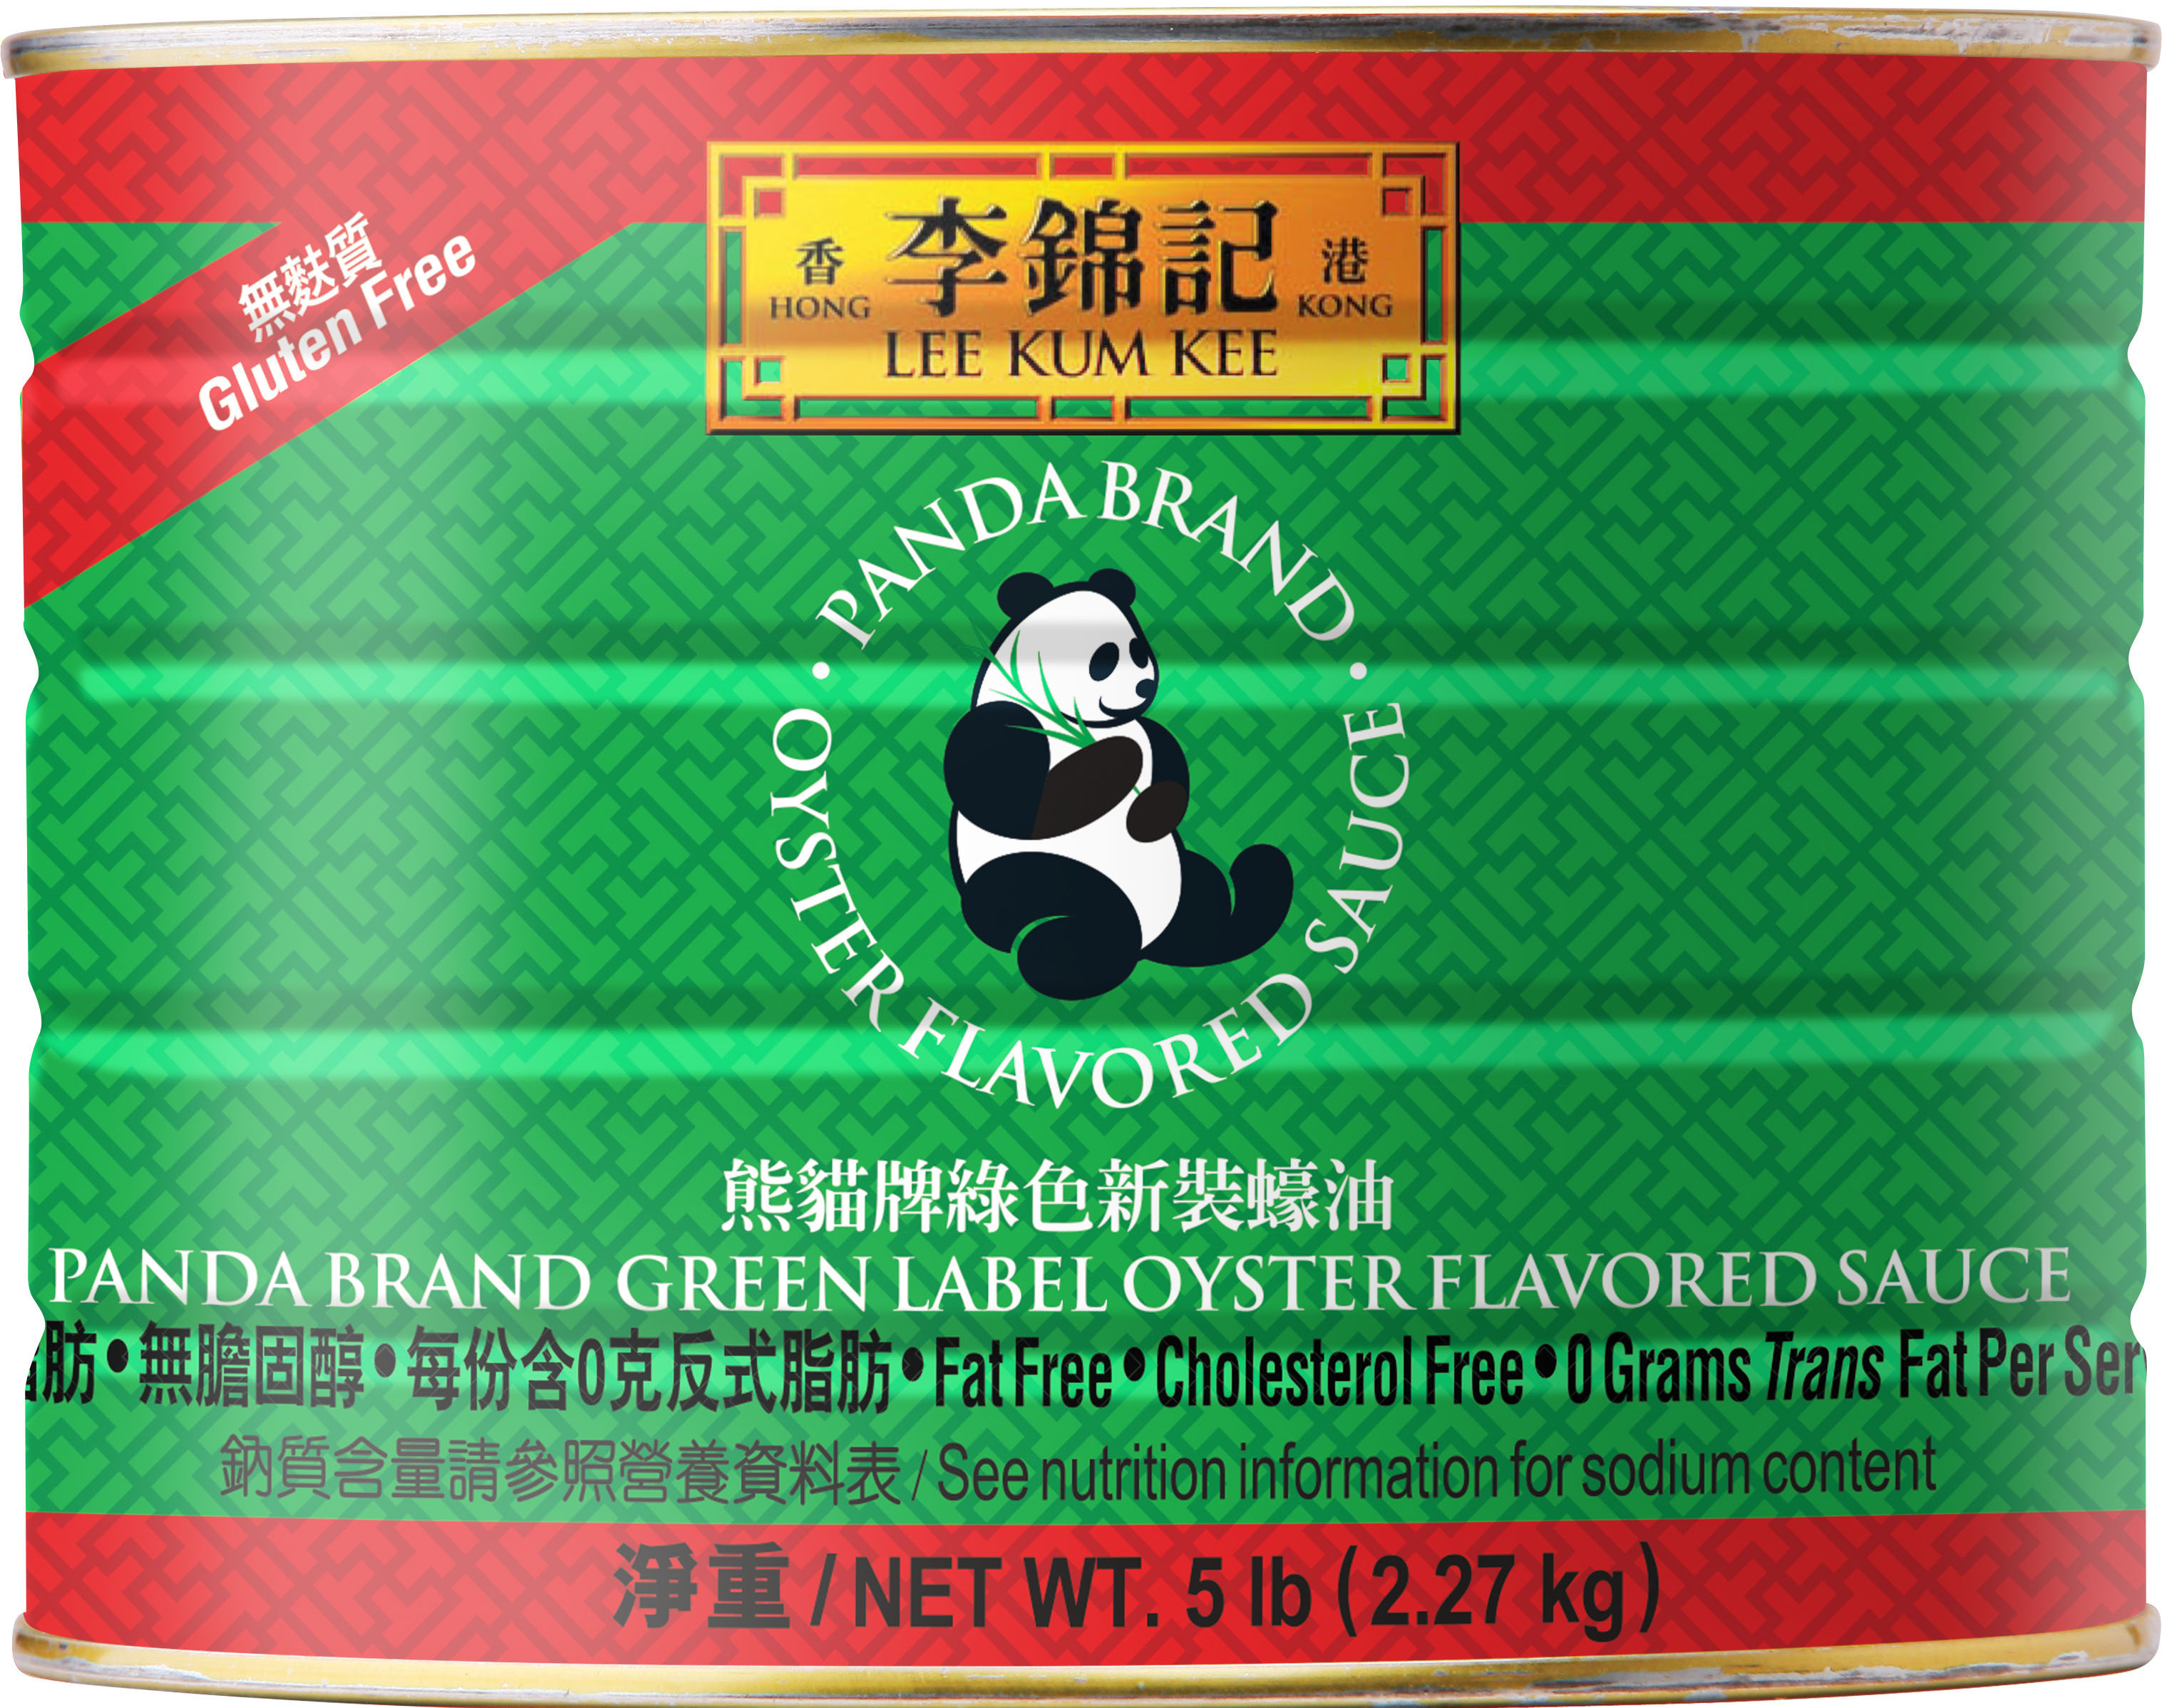 Panda Brand Green Label Oyster Flavored Sauce, 5 lb can